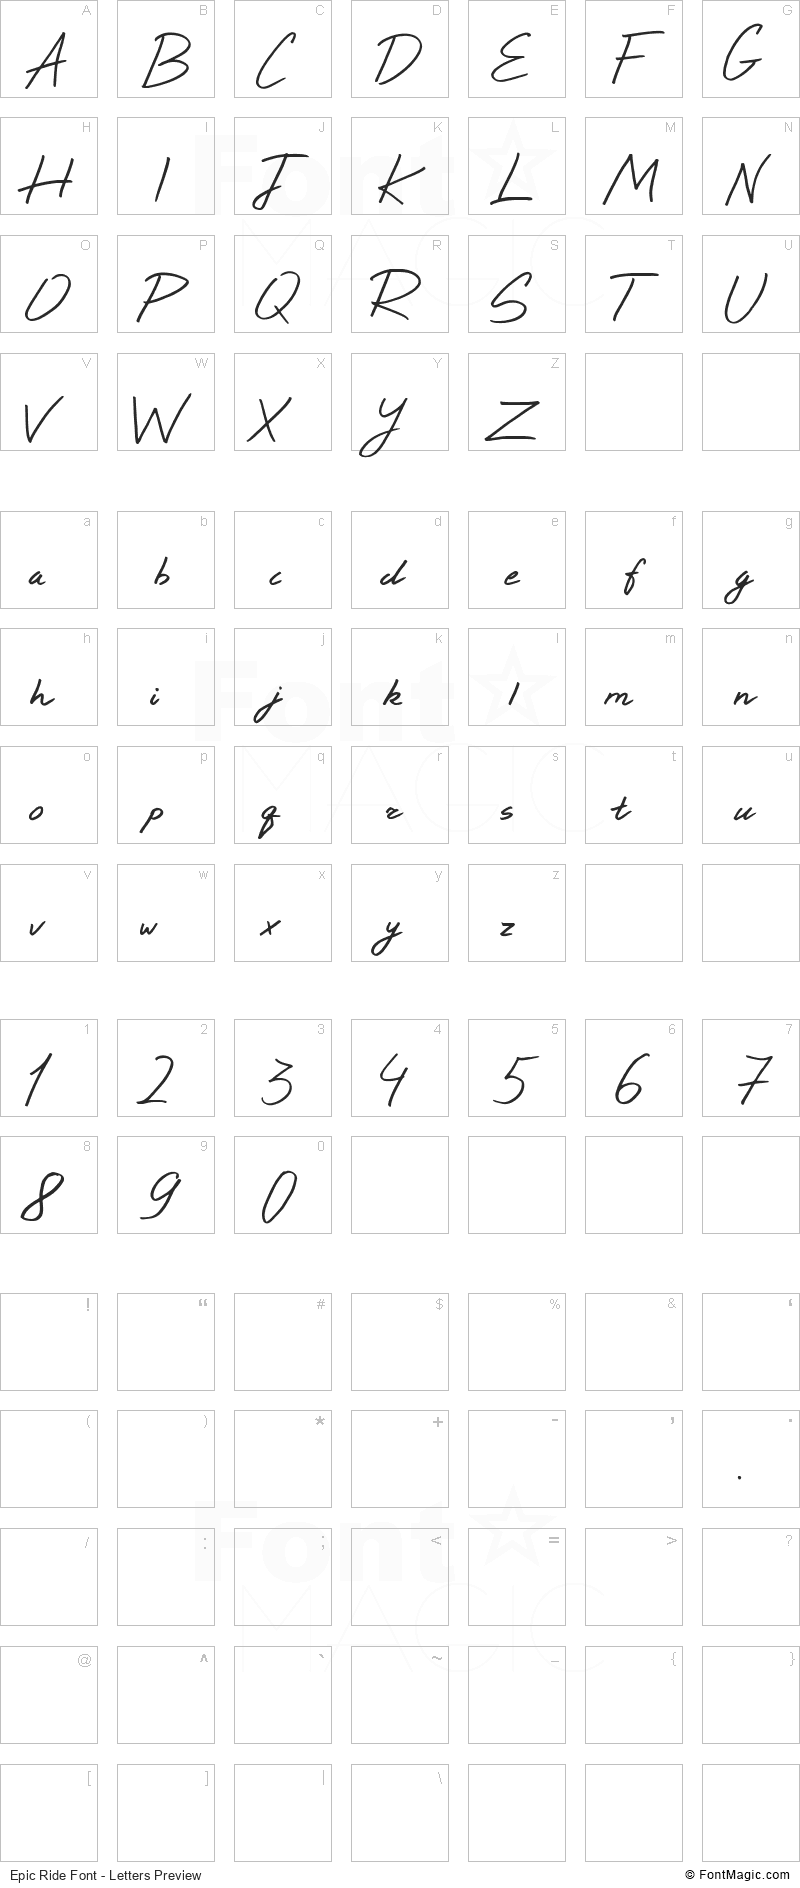 Epic Ride Font - All Latters Preview Chart